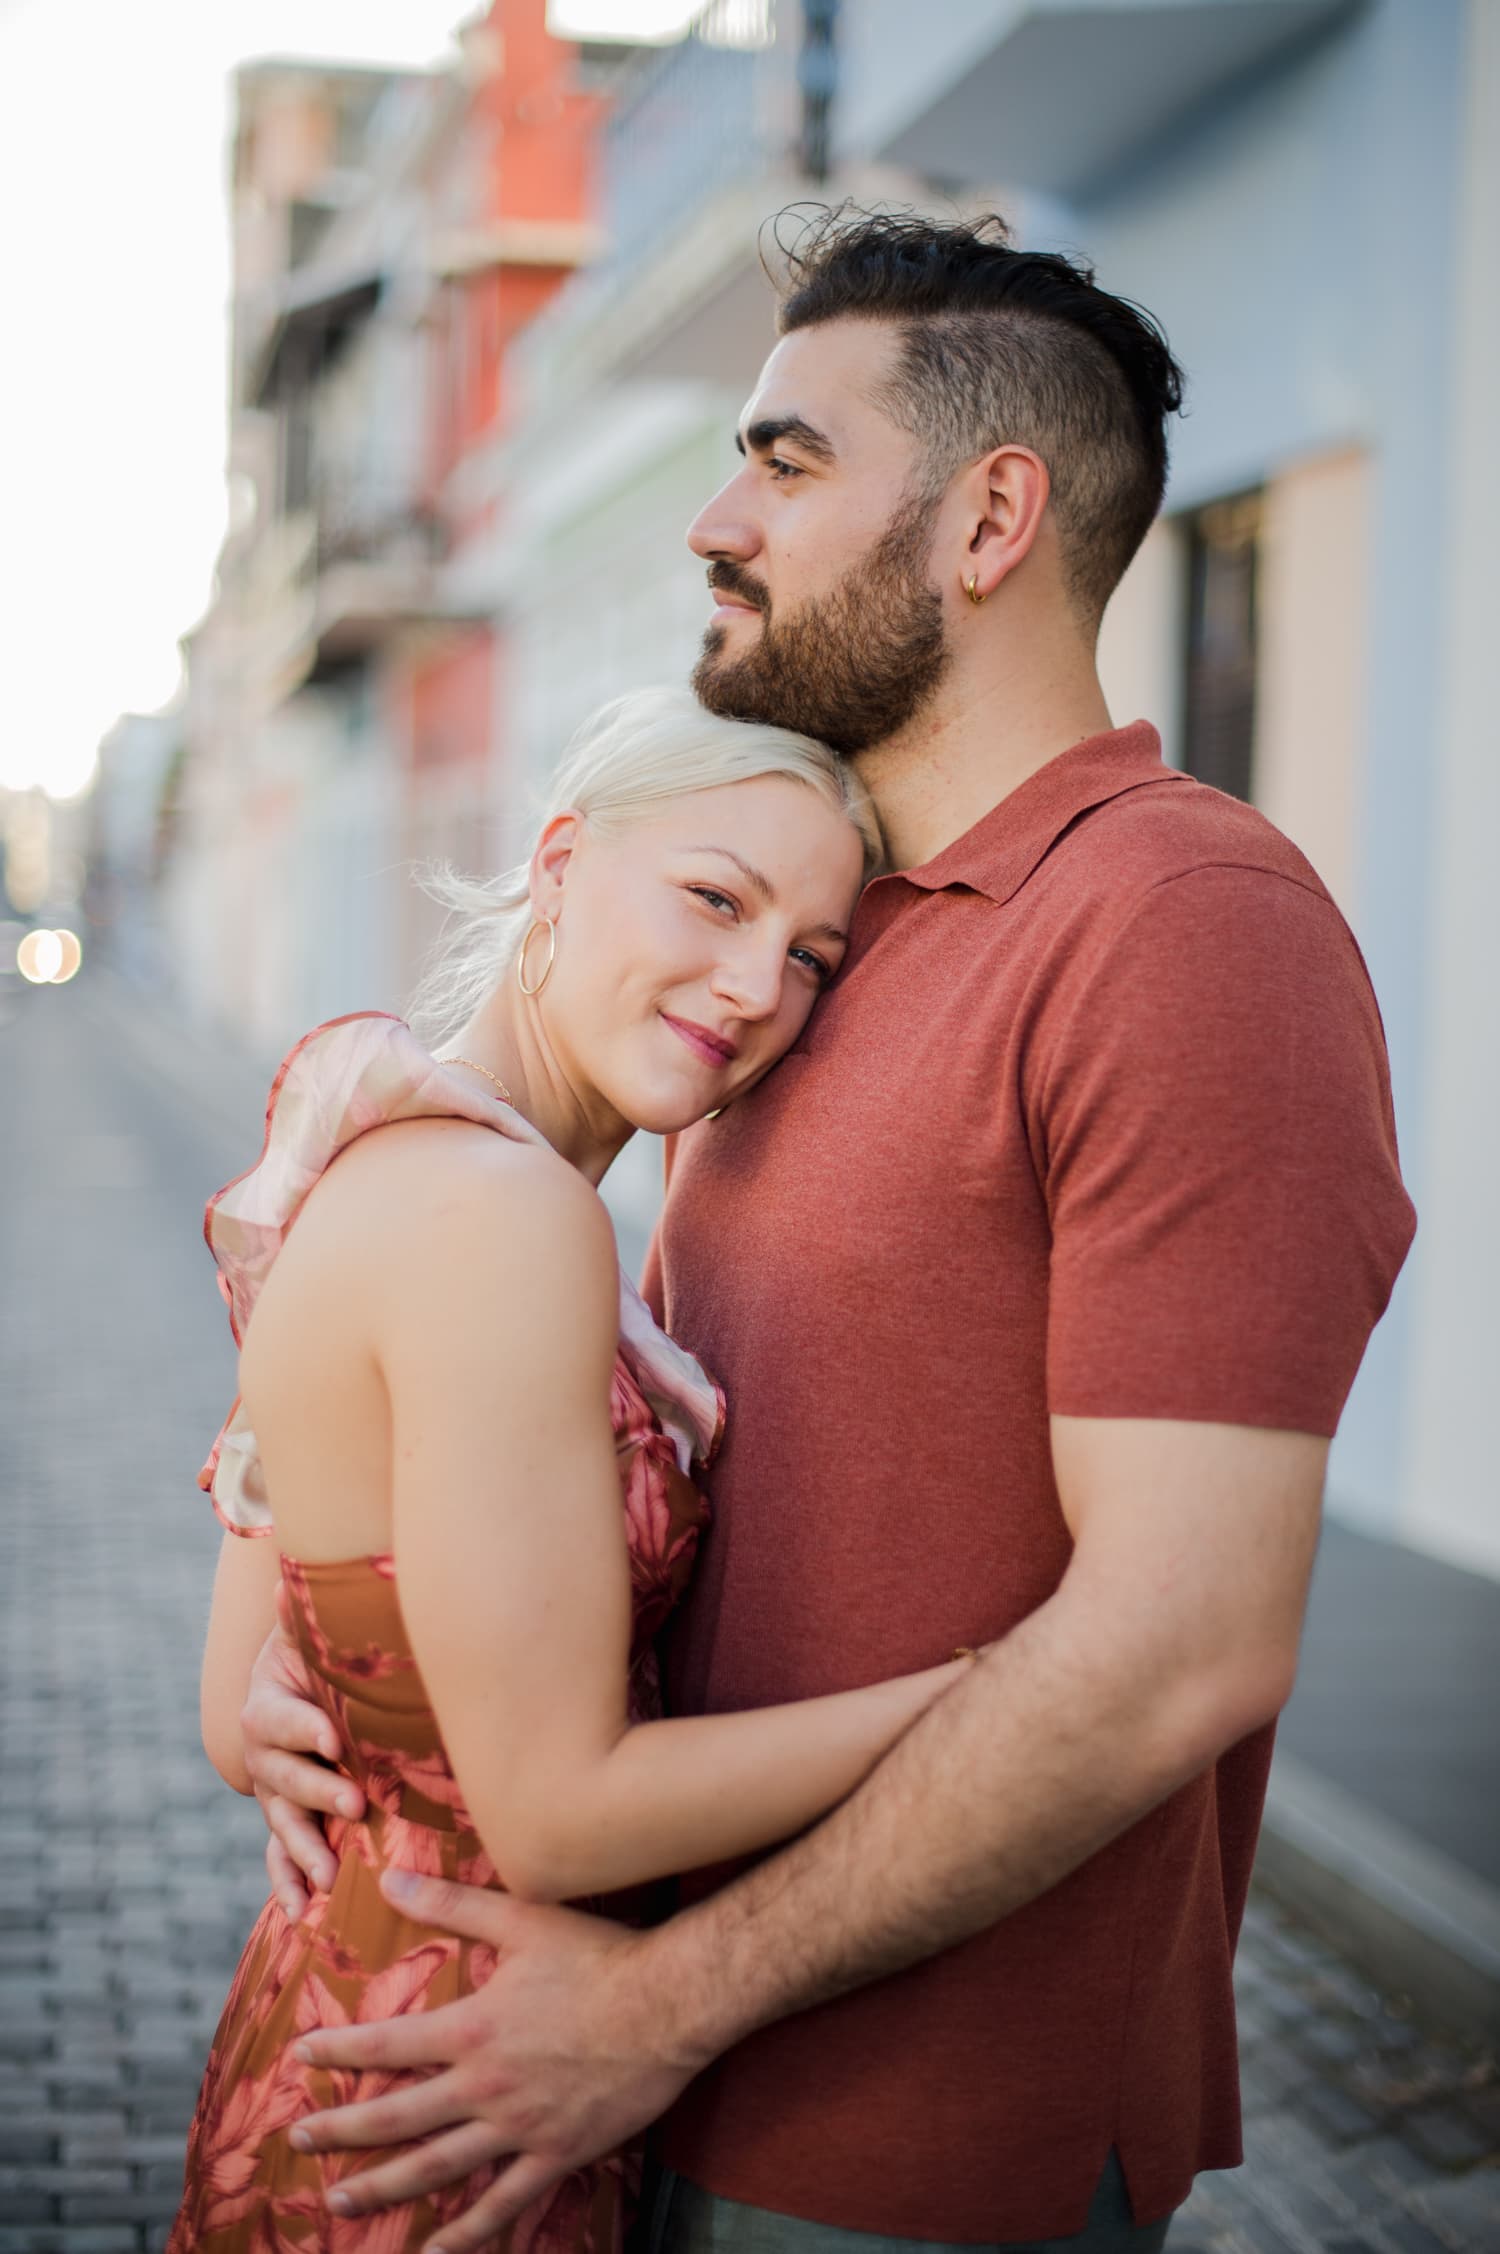 engagement session photo ideas in Old San Juan, Puerto Rico